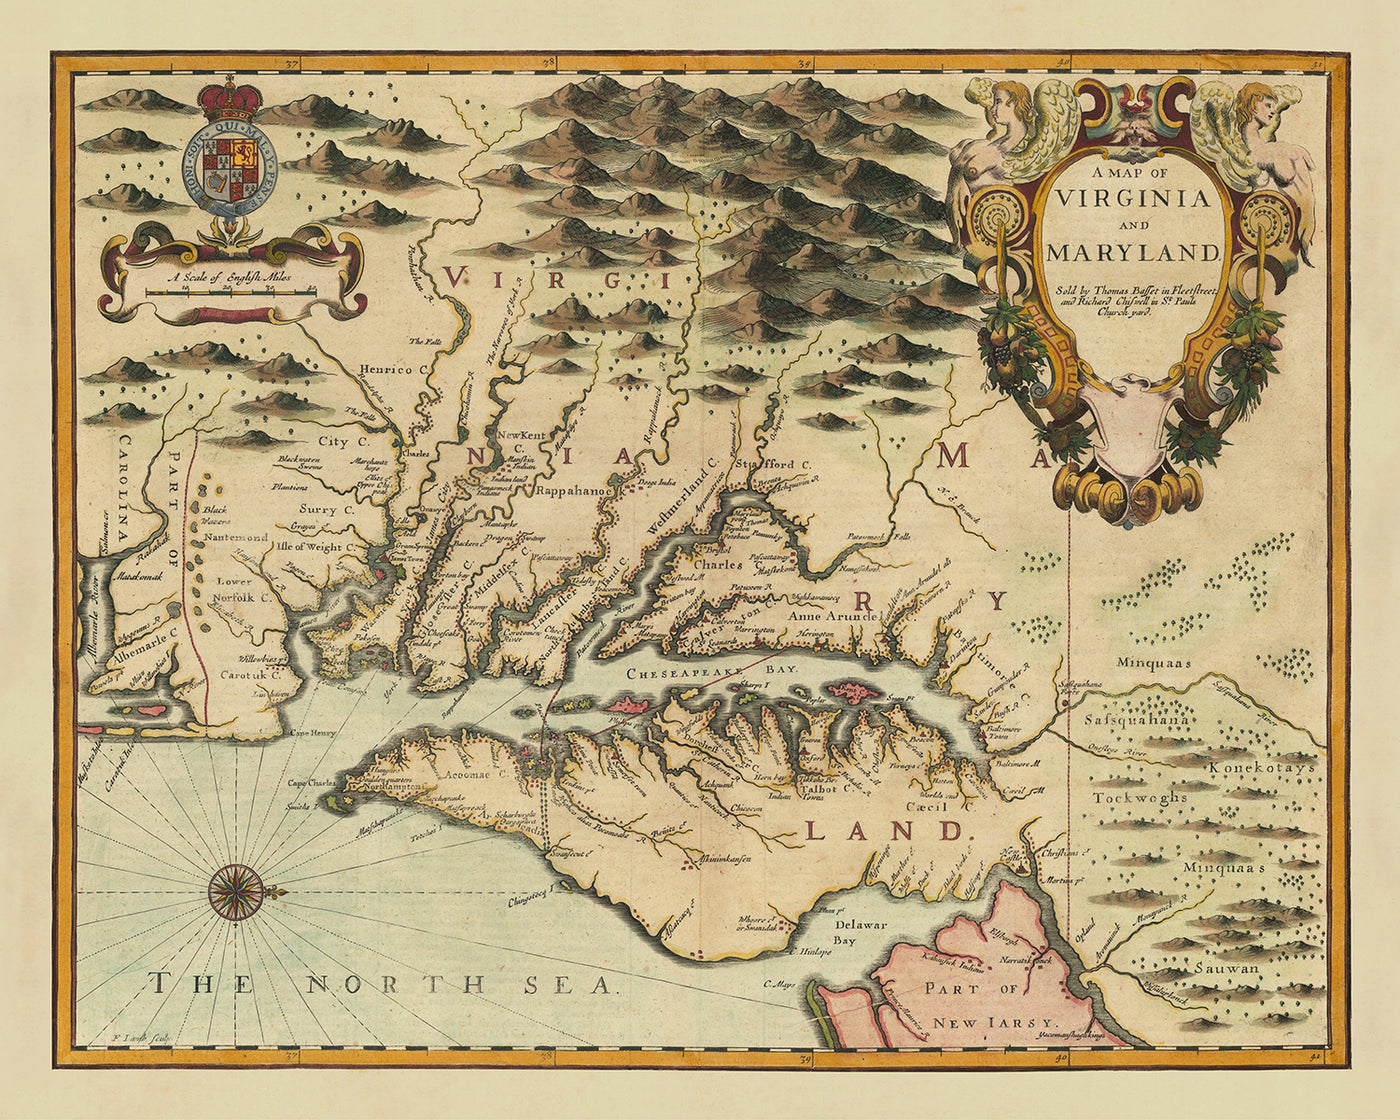 Old Map of Virginia & Maryland by John Speed, 1676: Jamestown, Yorktown, the Chesapeake Bay, and the Mason-Dixon Line